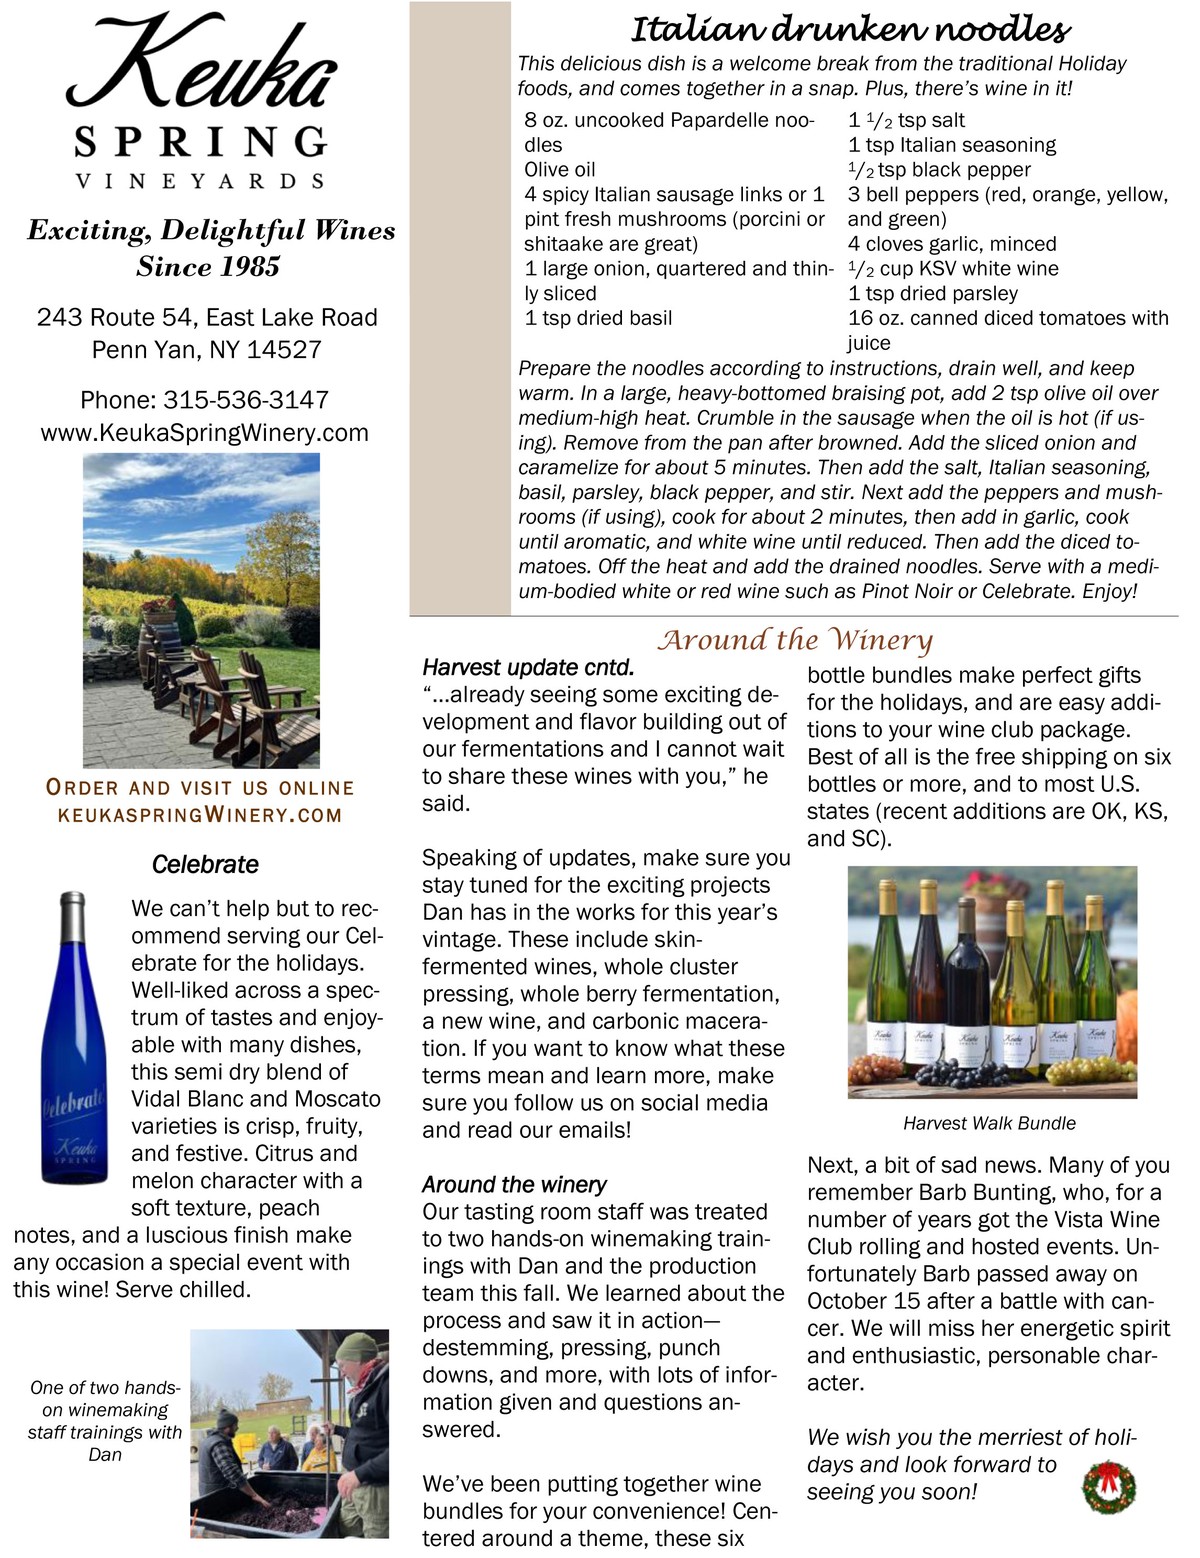 Second page of Holiday Vista Wine Club newsletter